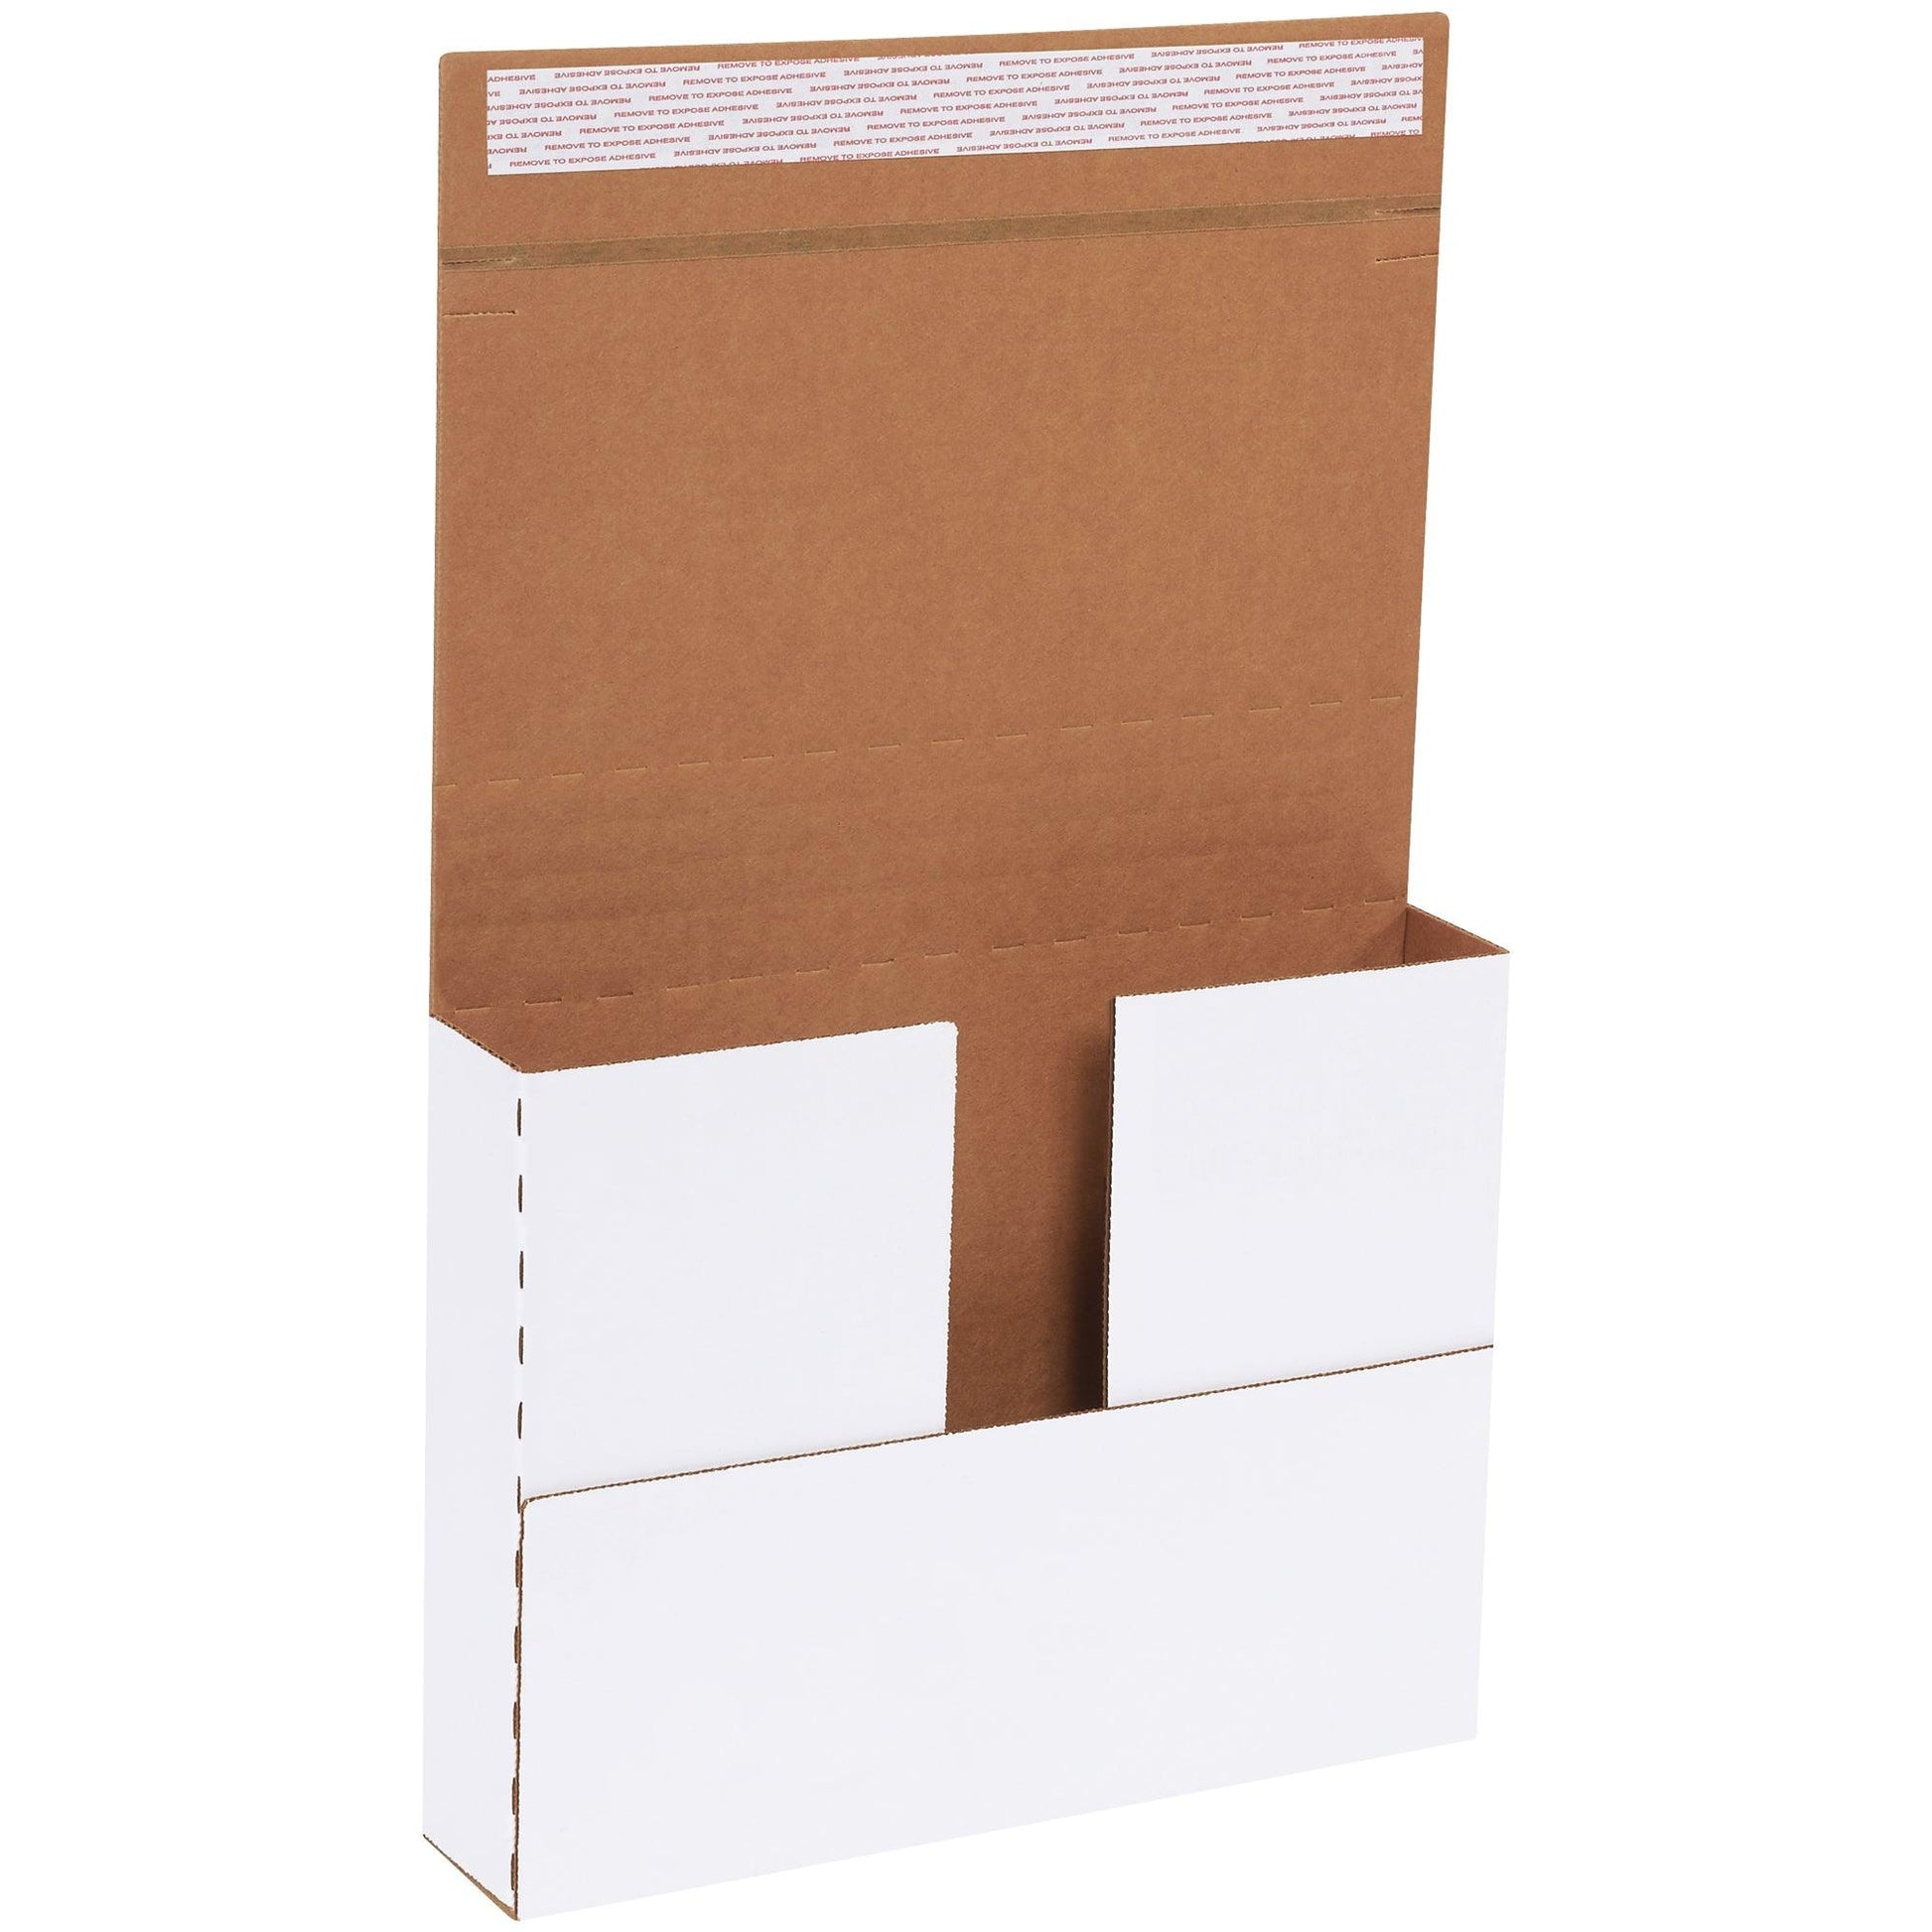 11 1/8 x 8 5/8 x 2" White Deluxe Easy-Fold Mailers - M1BKSS